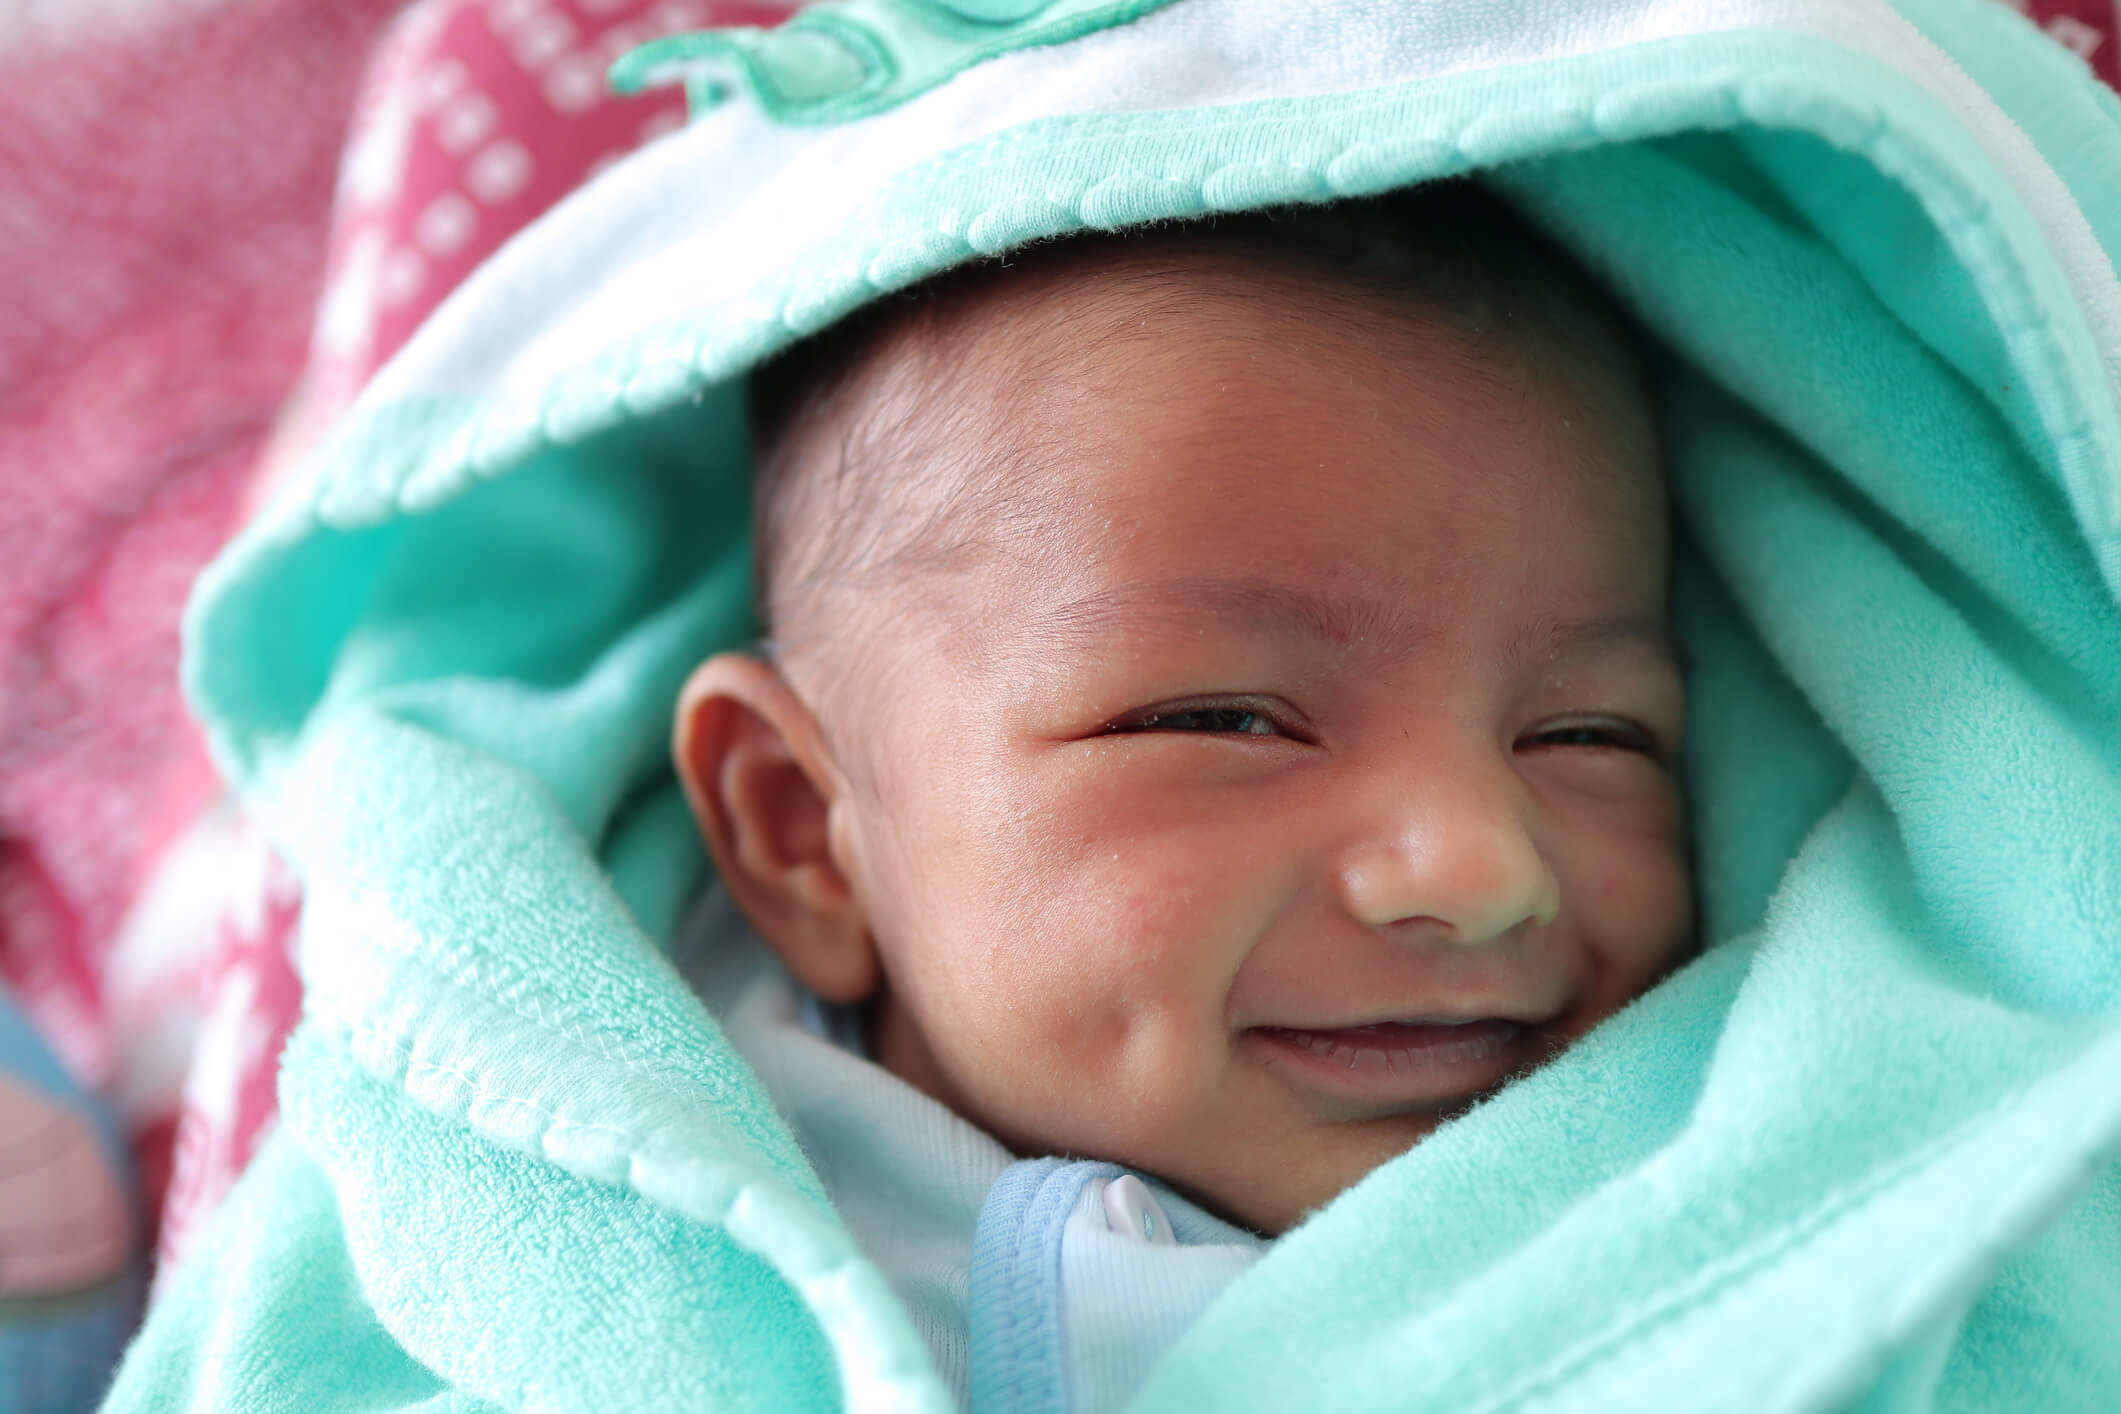 Smiling baby wrapped in blanket looks at camera